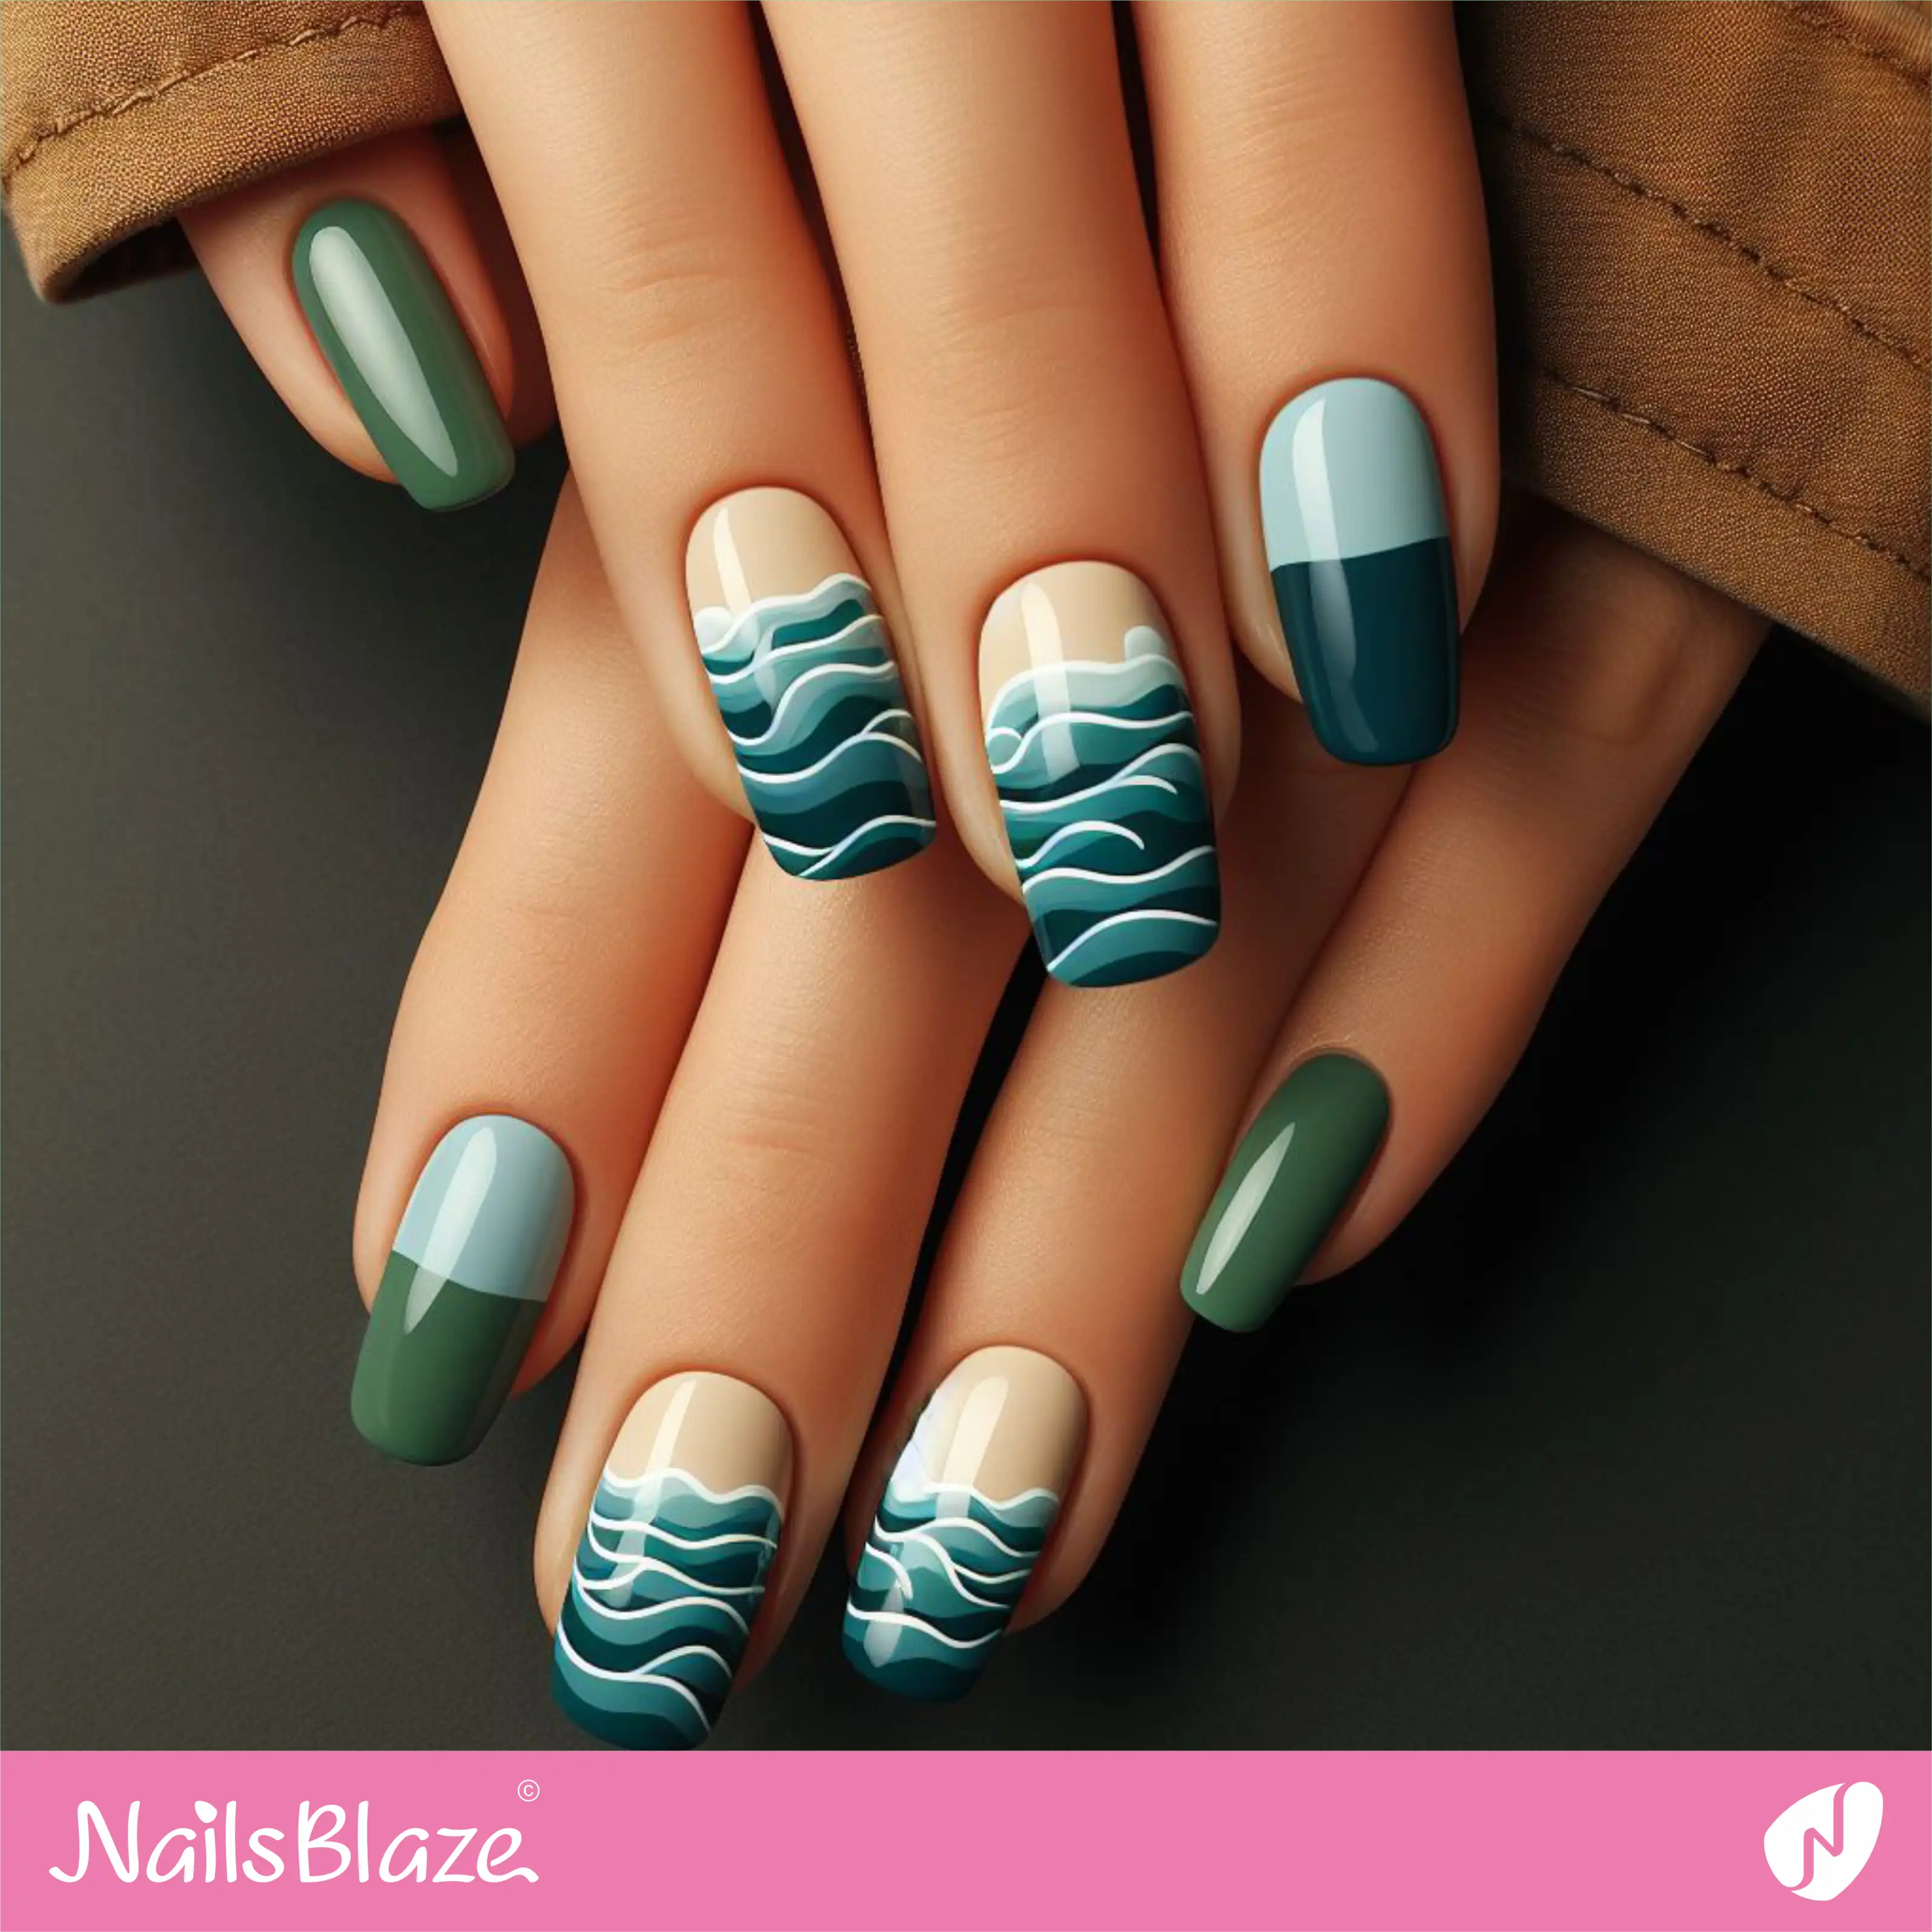 Glossy Color-Blocking Nails with Ocean Waves Design | Save the Ocean Nails - NB3281